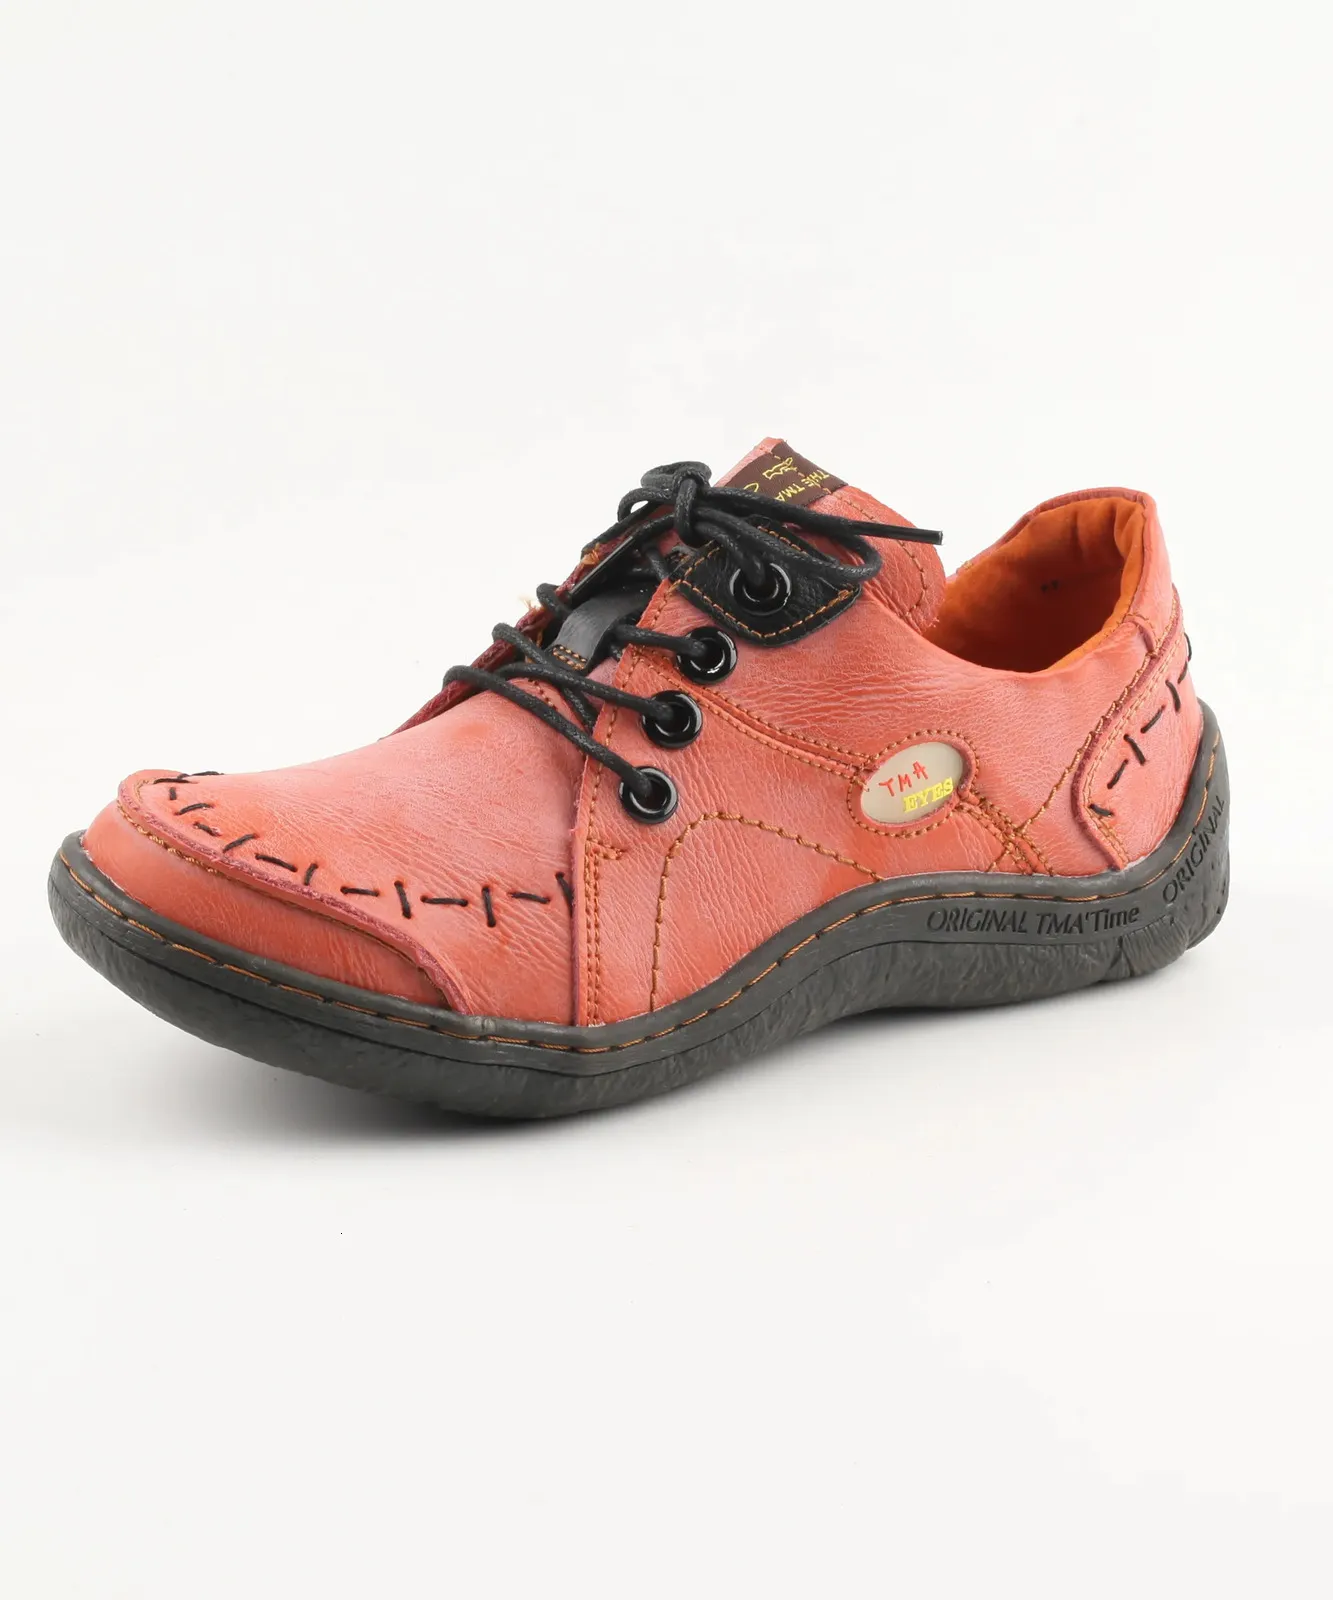 Hand Stitched Leather Skechers Casual Dress Shoes With TMA EYES For Women  Style 231027 From Shanye06, $42.45